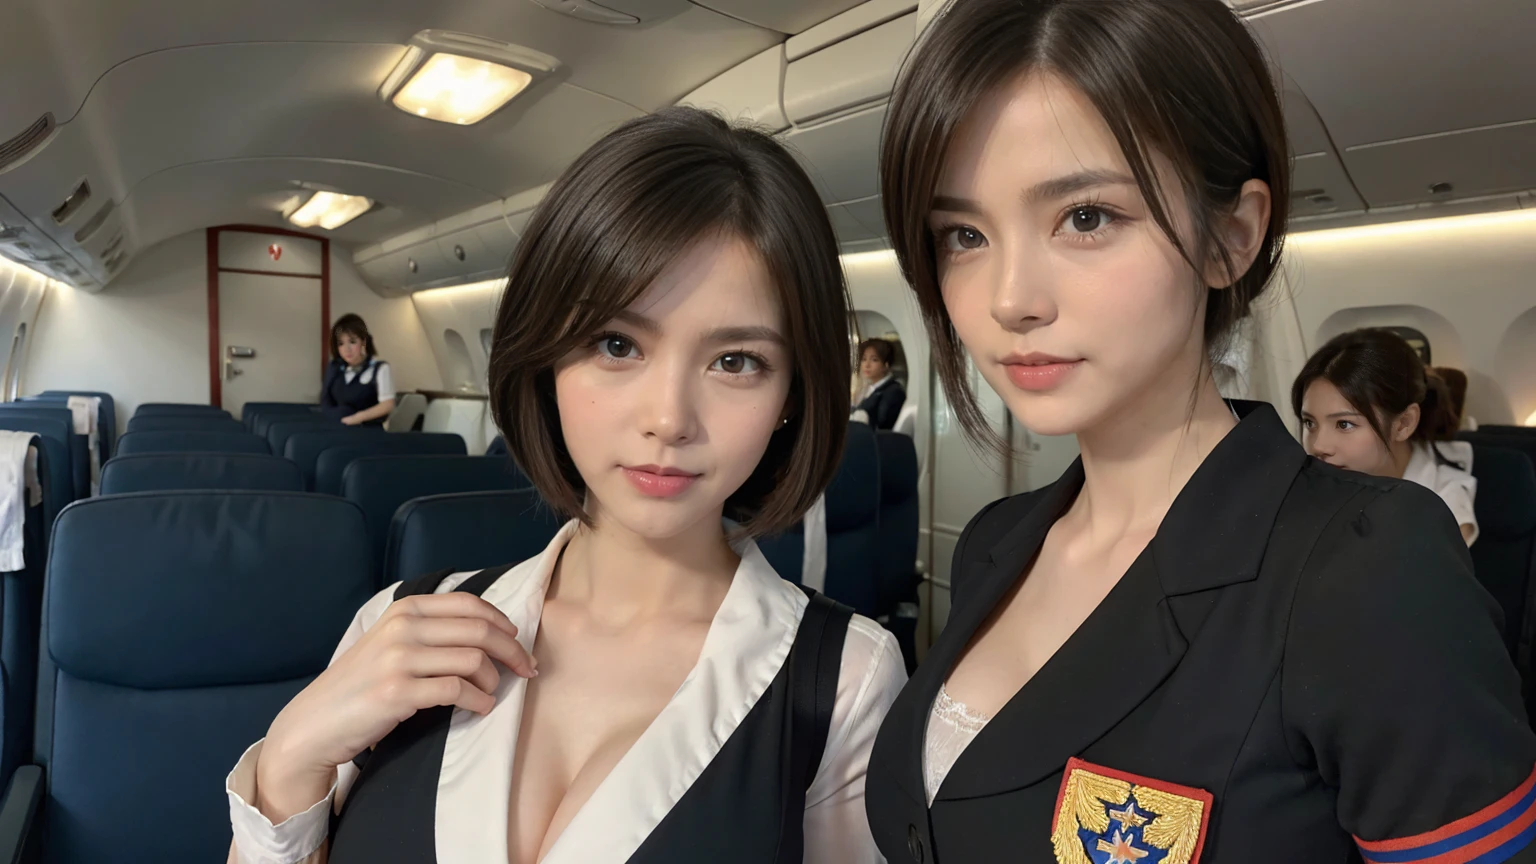 ((masterpiece, Highest quality)), Beautiful women from Cleavage :1.55, Cleavage:1.55,(brown〜Black Hair, Bob Hairstyle, Square face), (Big Breasts:1.5), (Natural Skin), foot, (Super short airline stewardess uniform:1.3), (Seductive look:1.2), Airplane cabin background, (超High resolution, 8k wallpaper, High resolution), Cinema Lighting, Physically Based Rendering, Award-winning, Highly detailed skin, Highly detailed face, High Detail Eyes, Carl Zeiss 85mm F/1.4, by Ellen von Unwerth